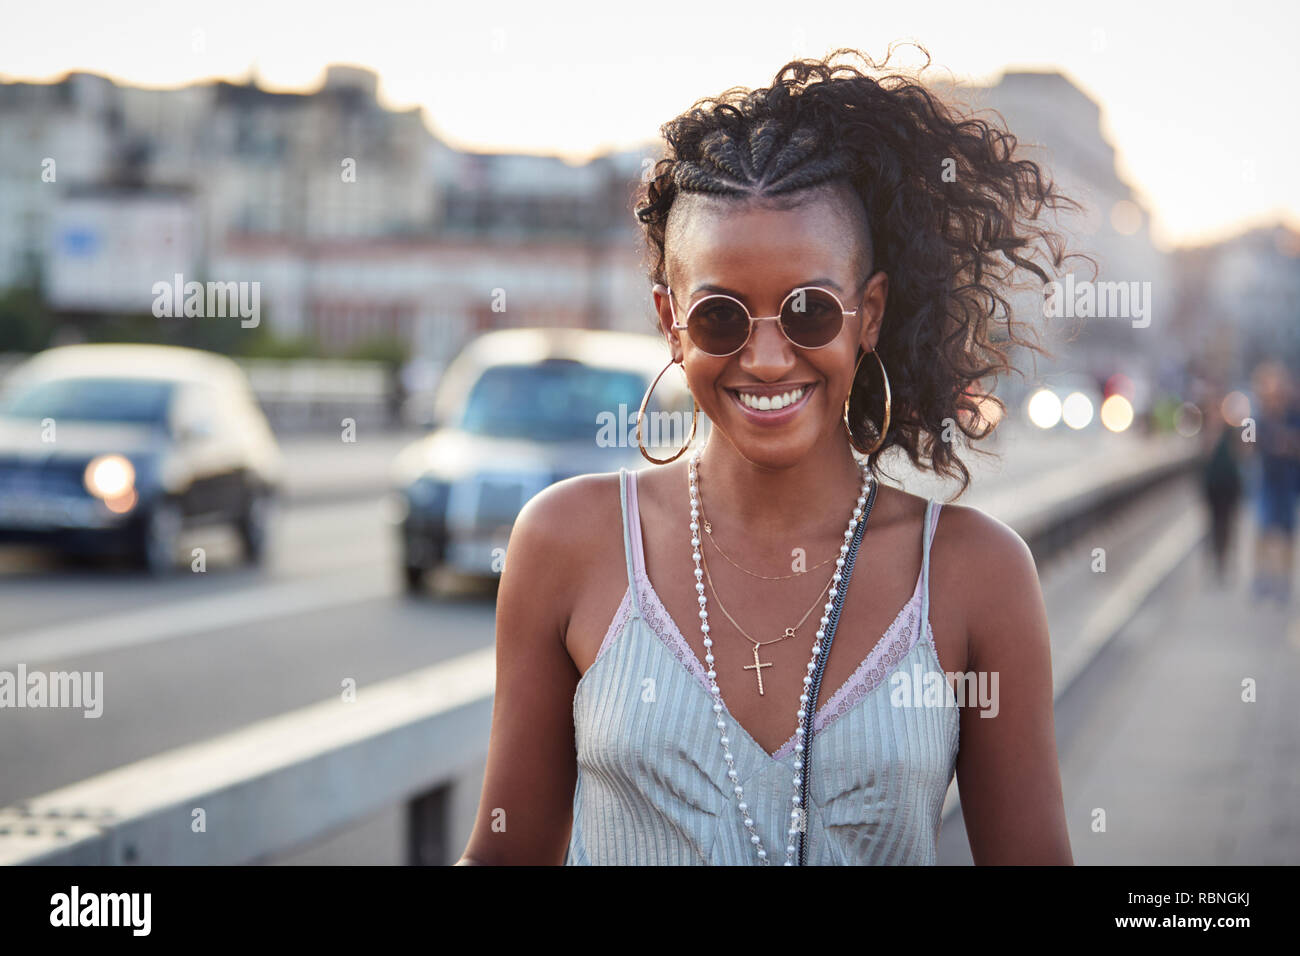 Trendy woman in striped camisole and sunglasses, portrait Stock Photo